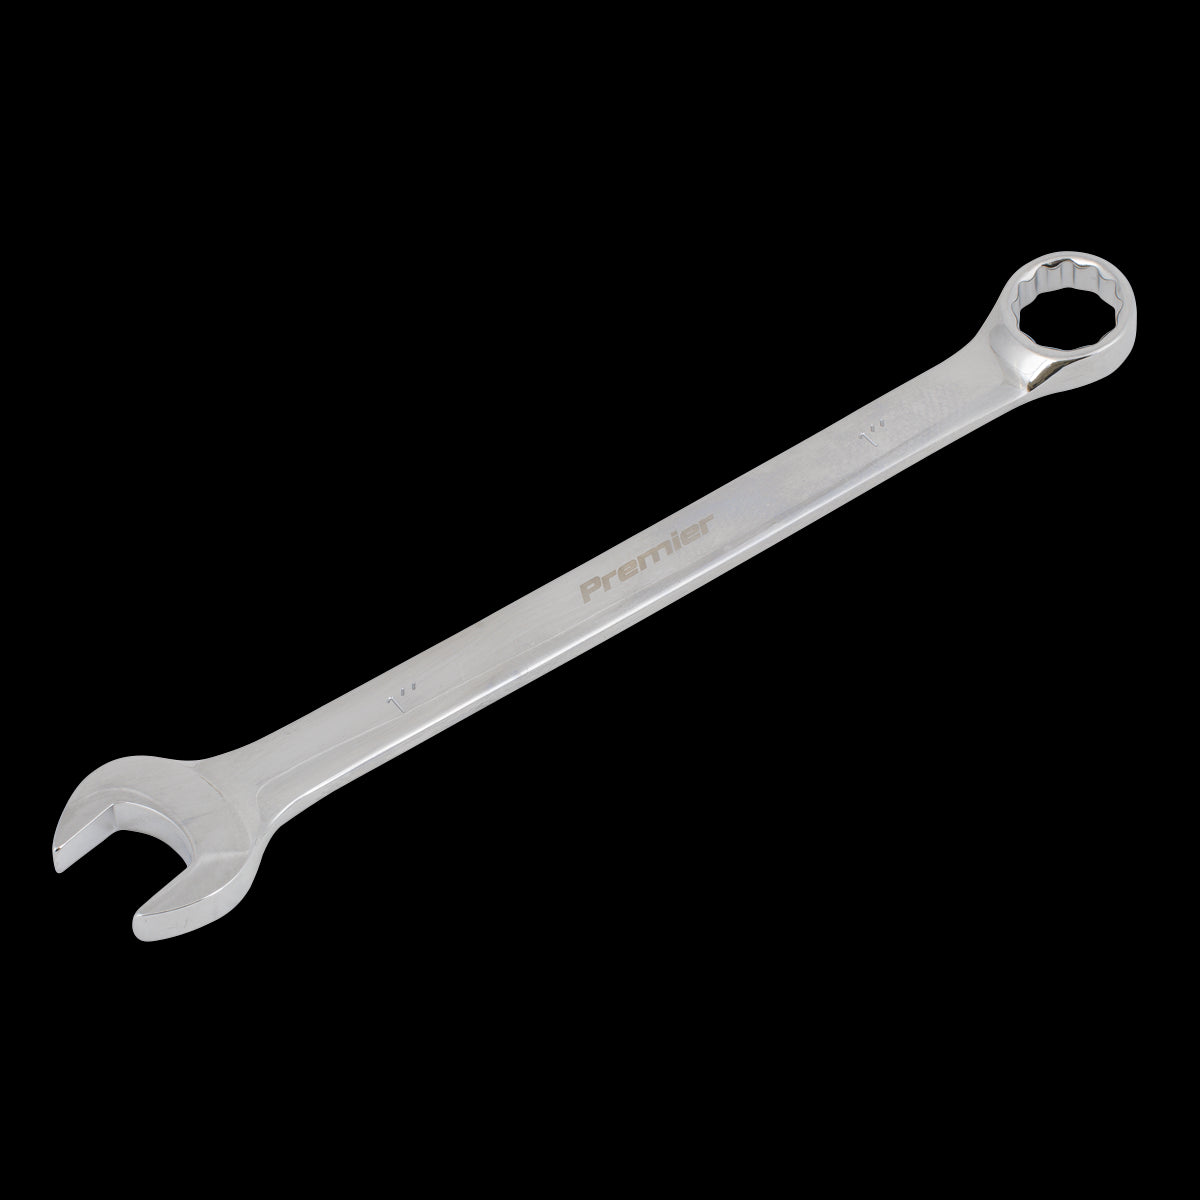 Sealey Premier Combination Spanner 1" - Imperial